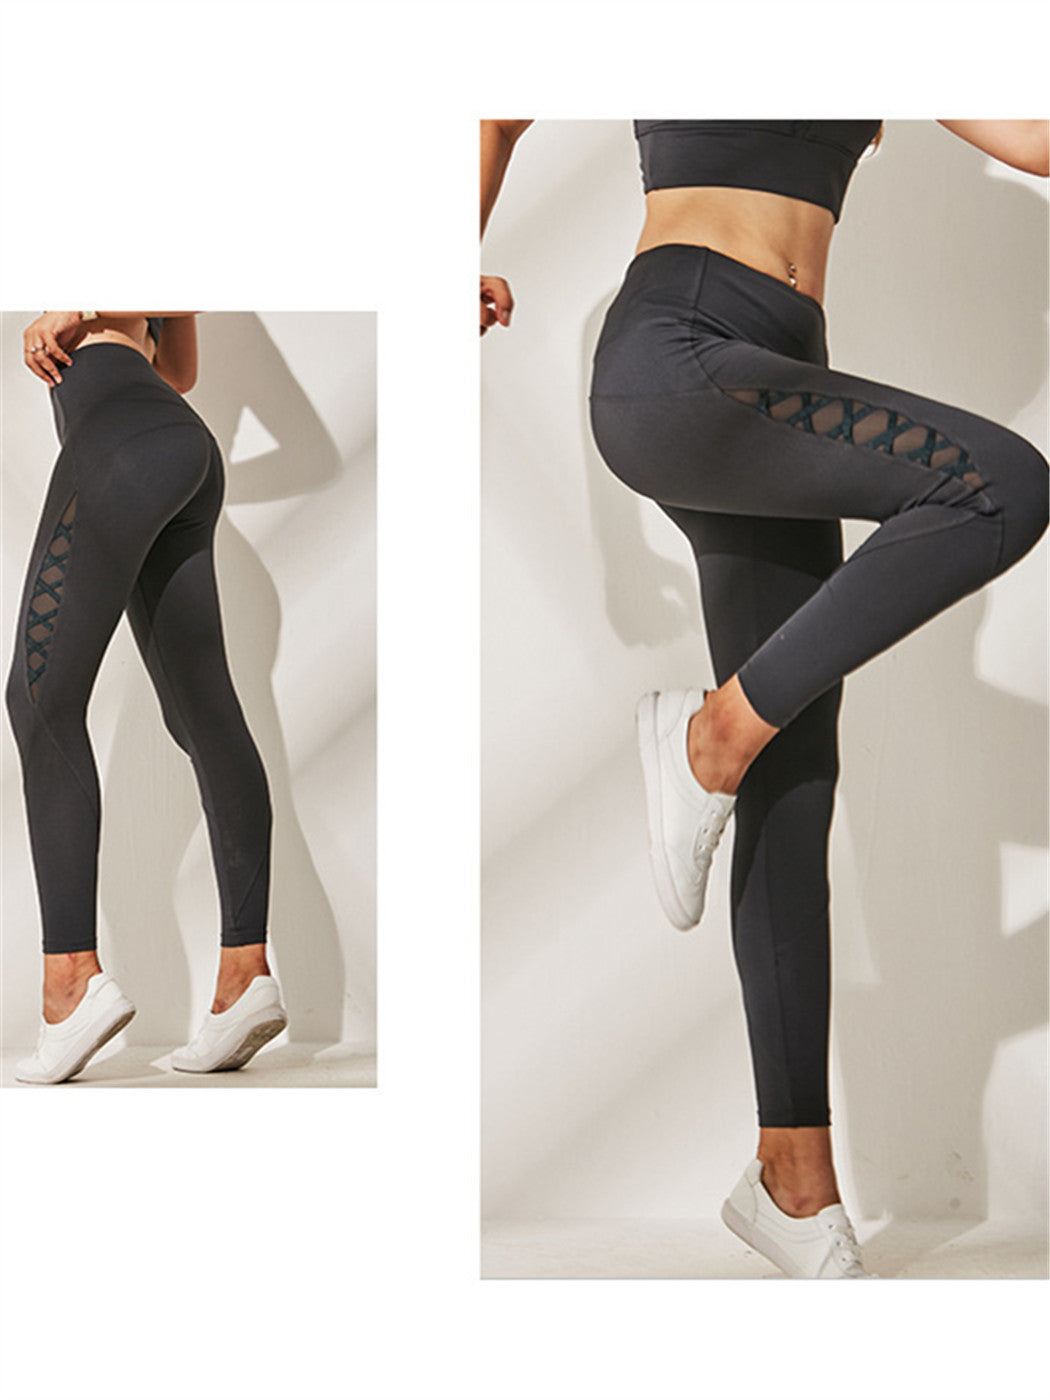 High-Waisted Strappy Yoga Pants